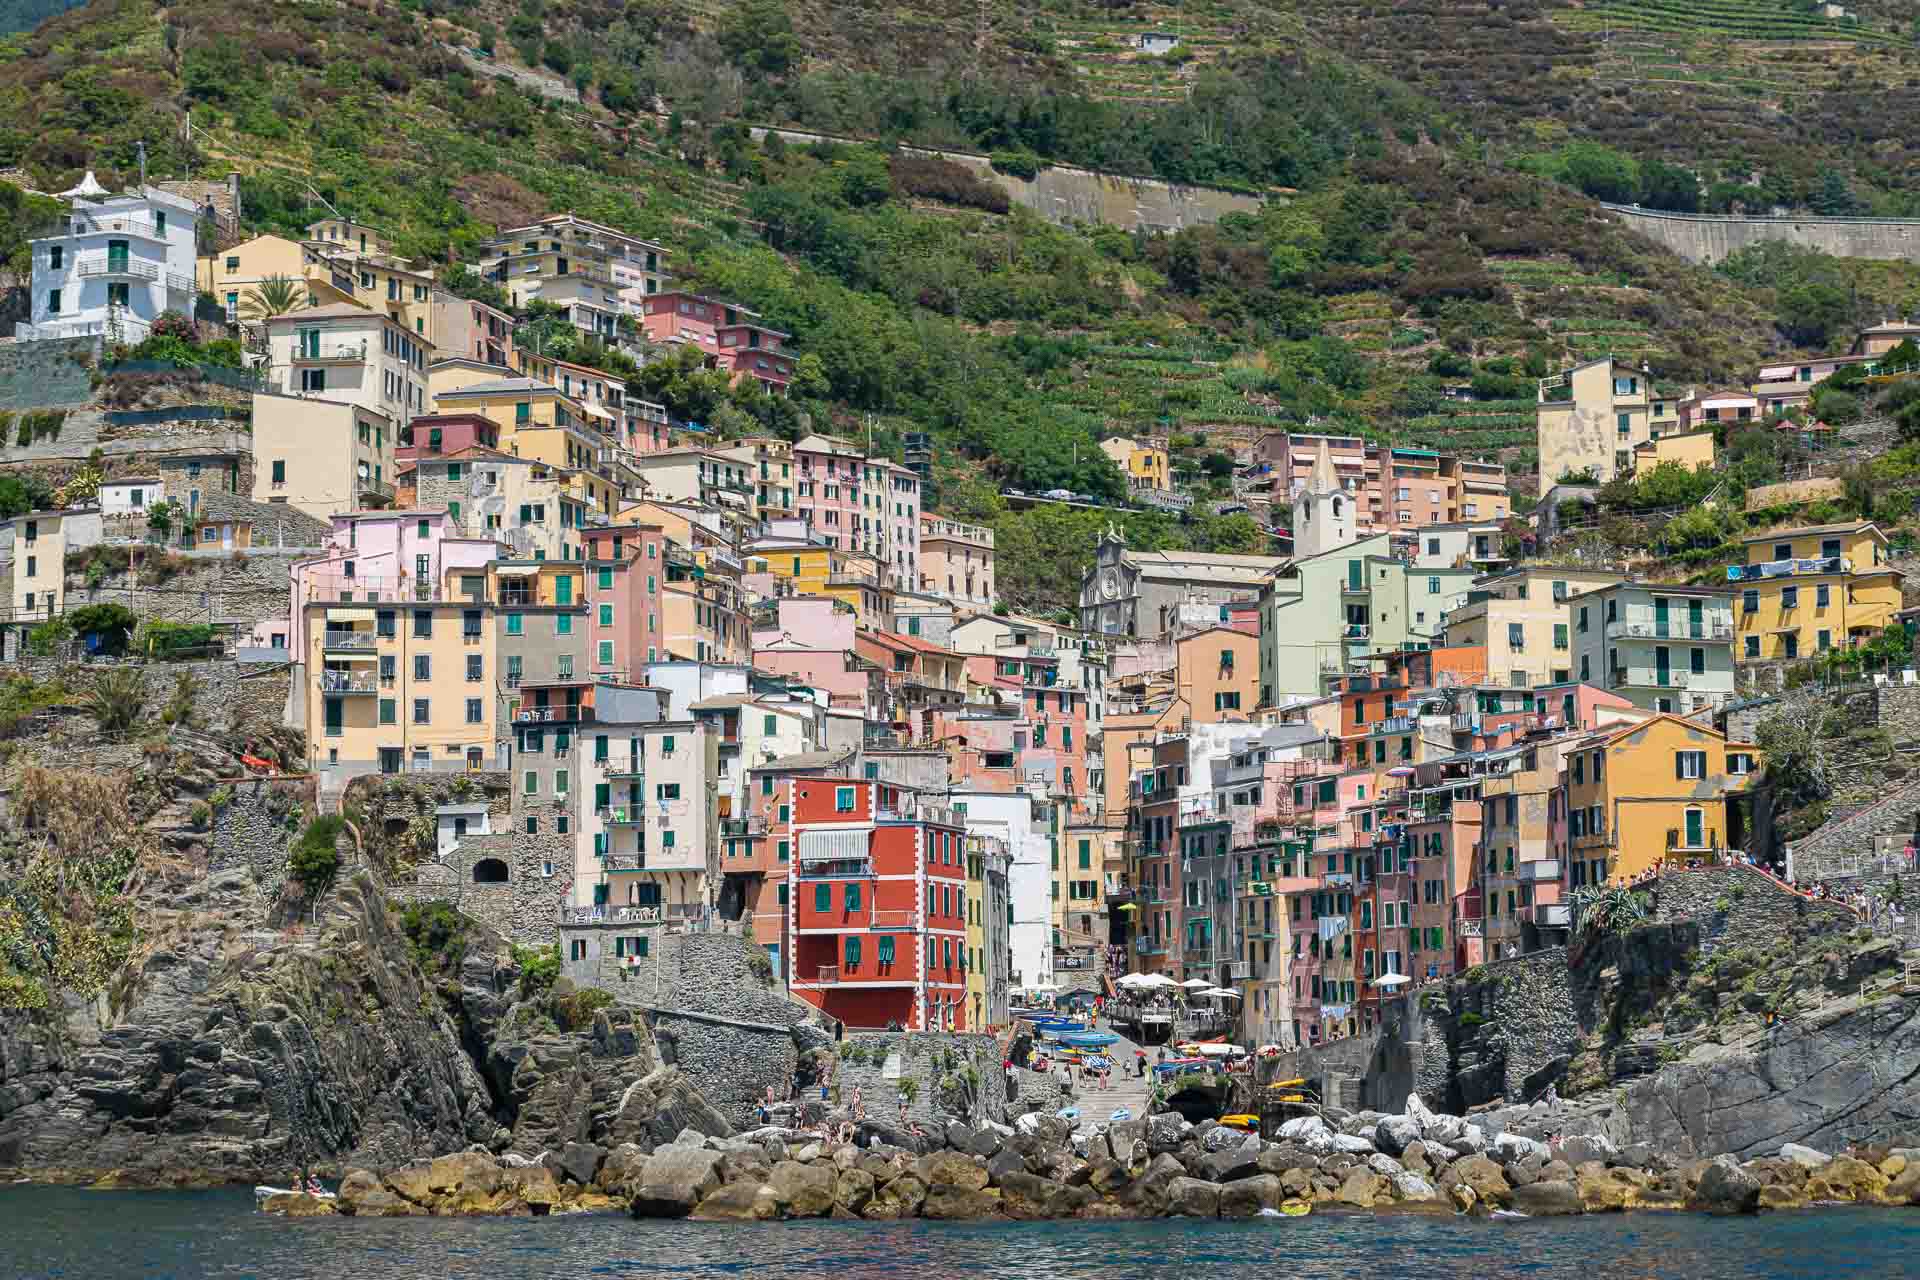 The village of Riomaggiore with colourful houses on each side of a hill shaping like V until the beach